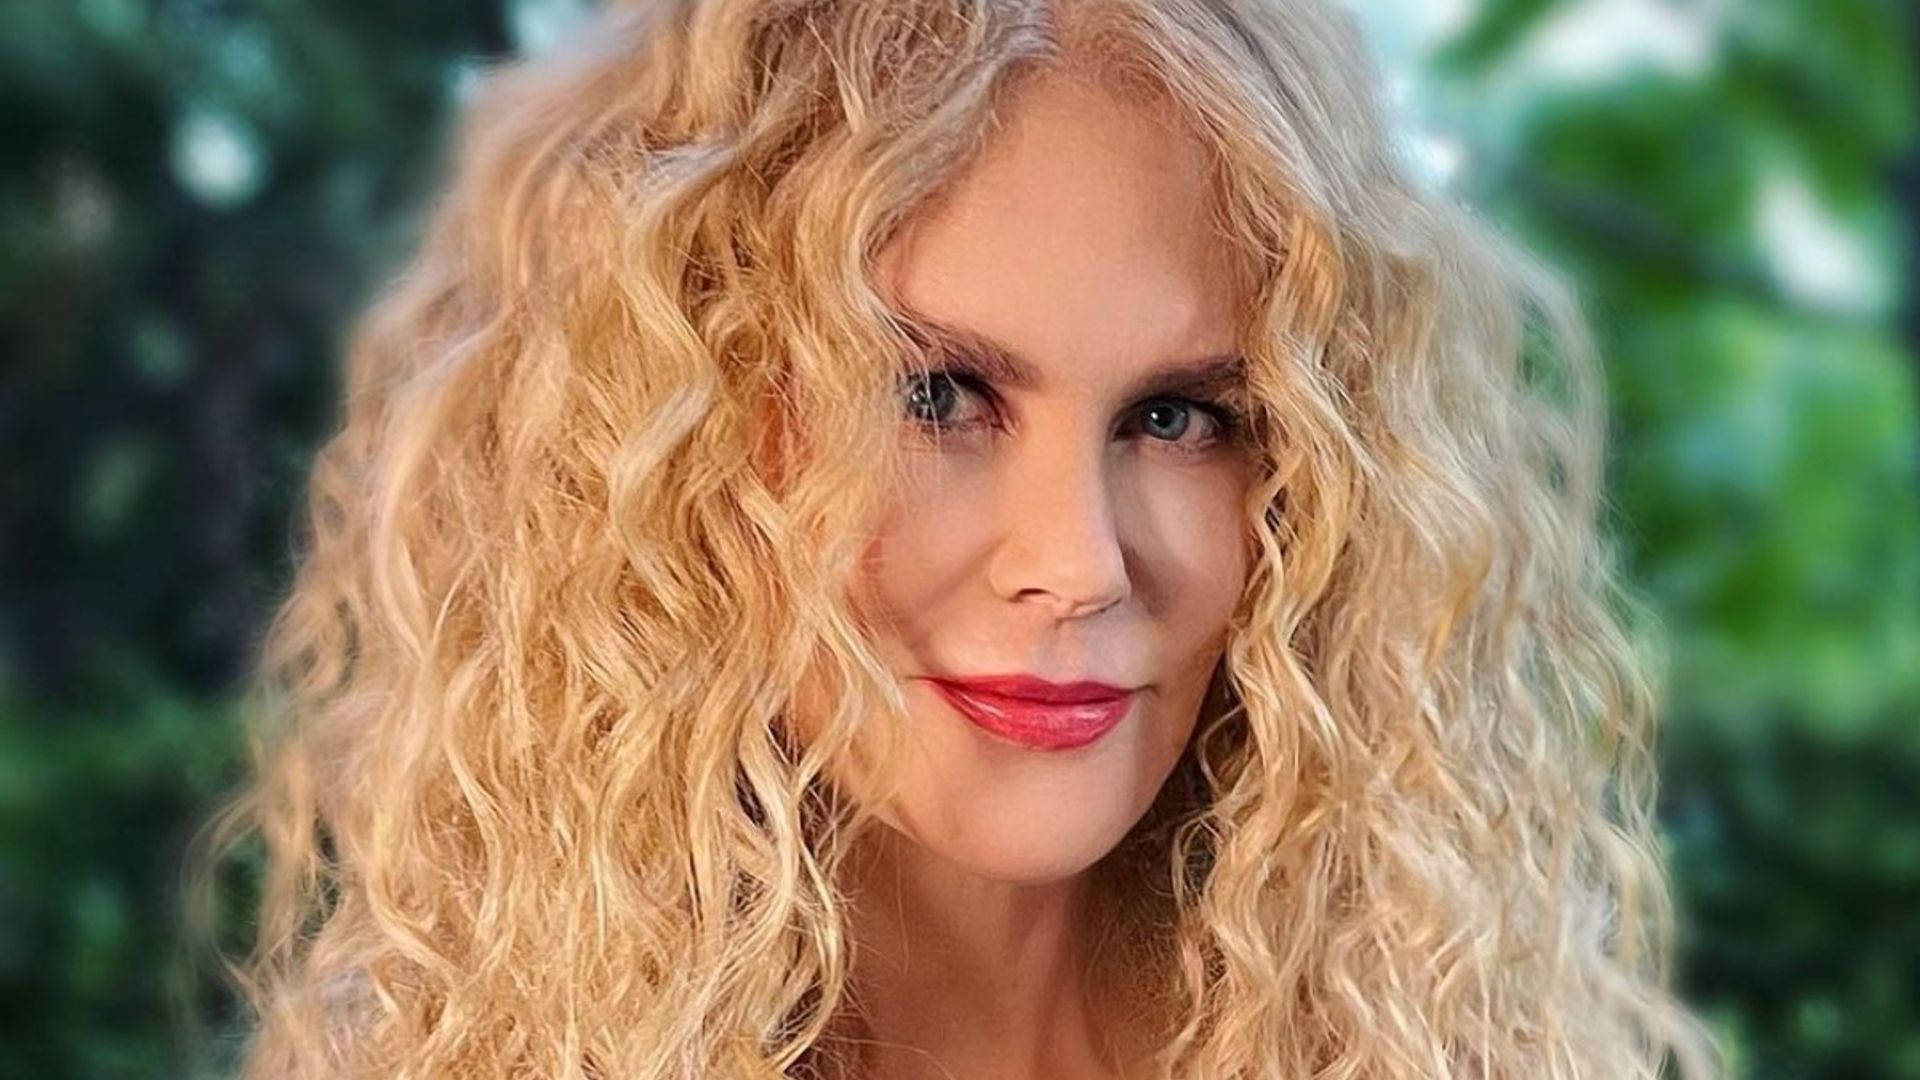 Nicole Kidman shares incredible throwback snaps from 1995 film - and she hasn’t aged!